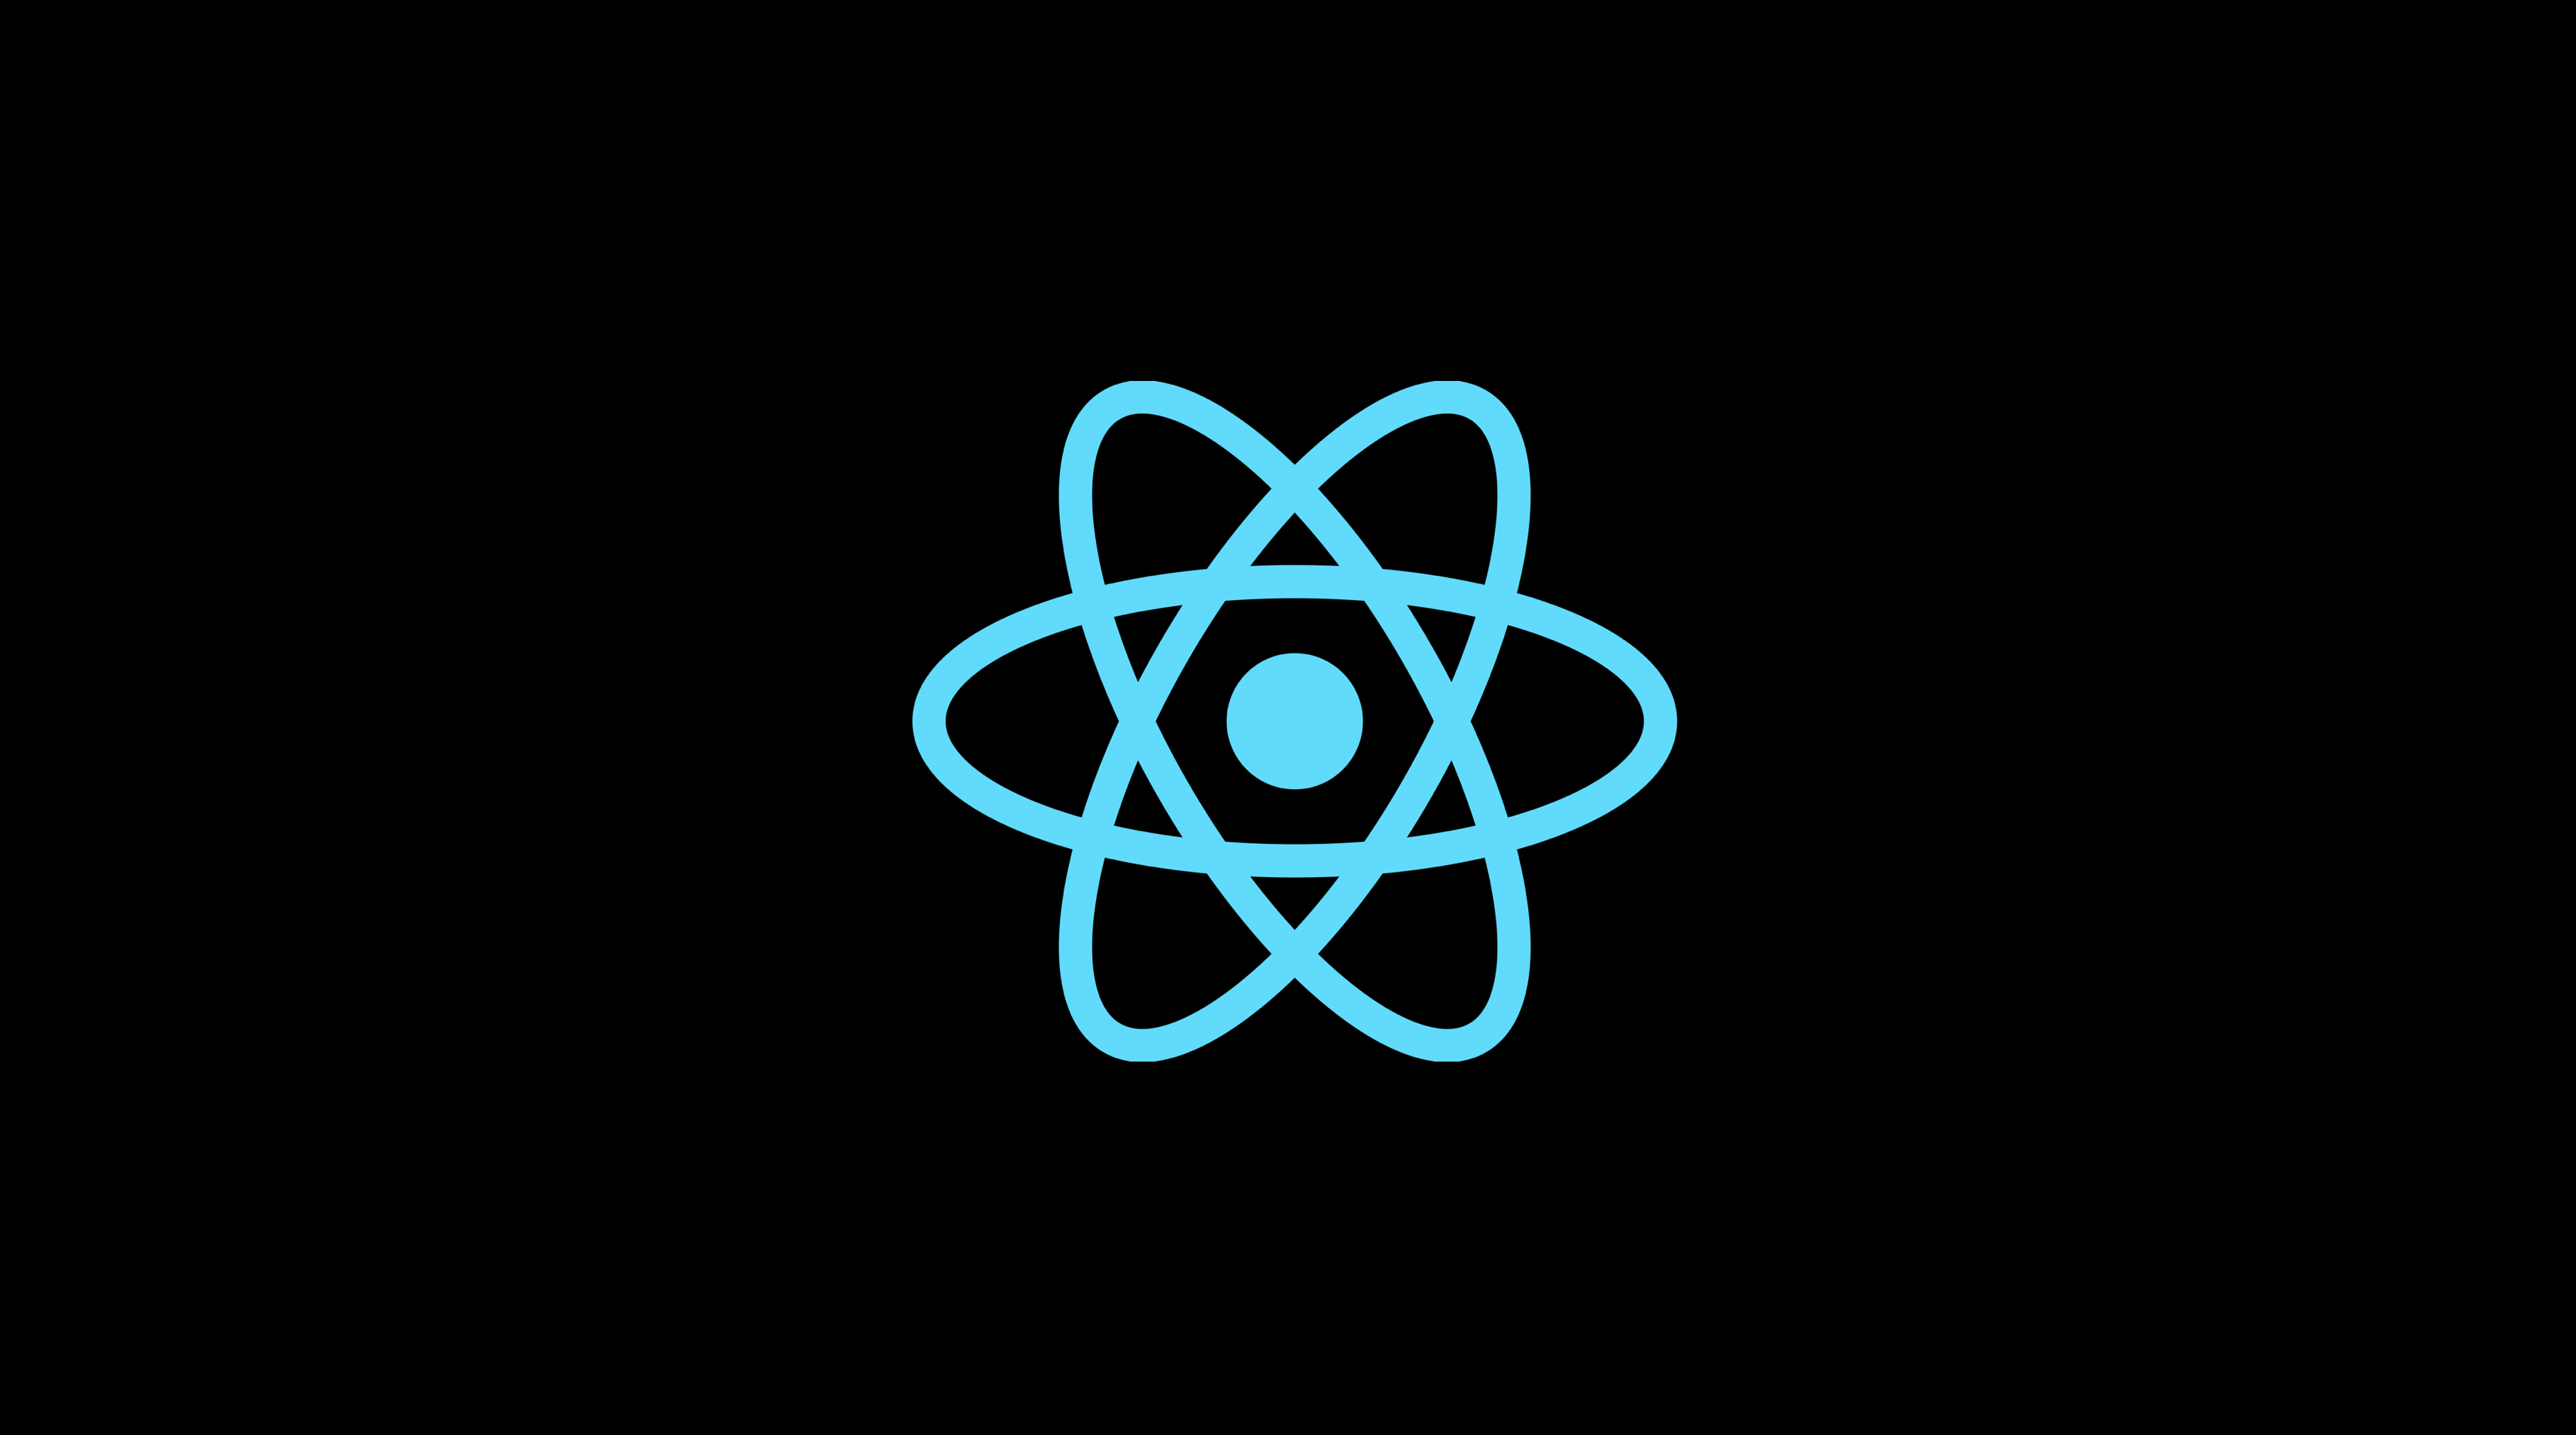 Advanced React by Lydia Hallie